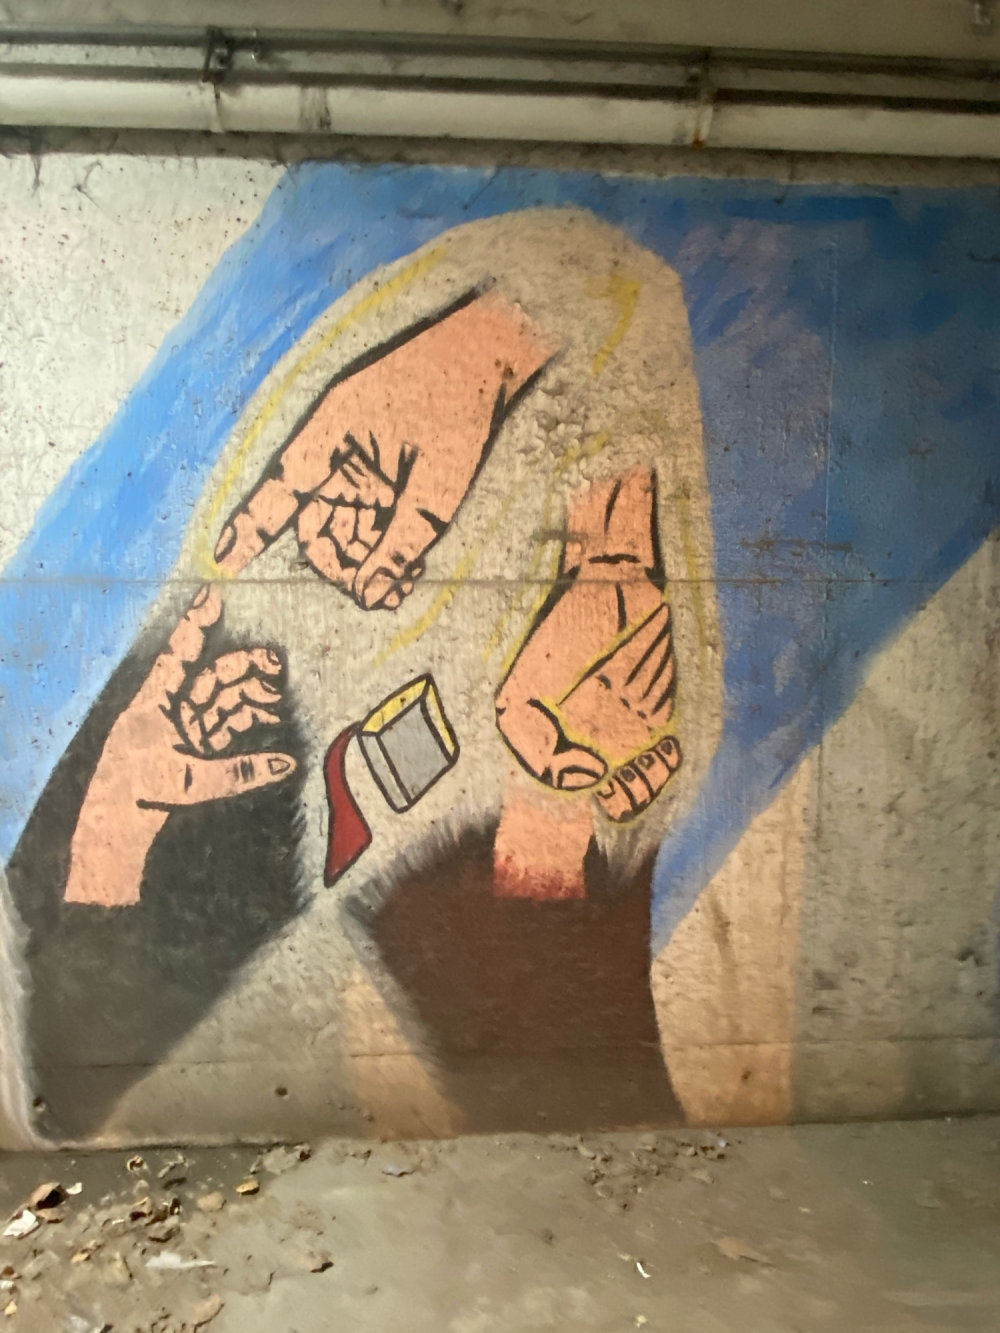 mural in Cicero by artist unknown.